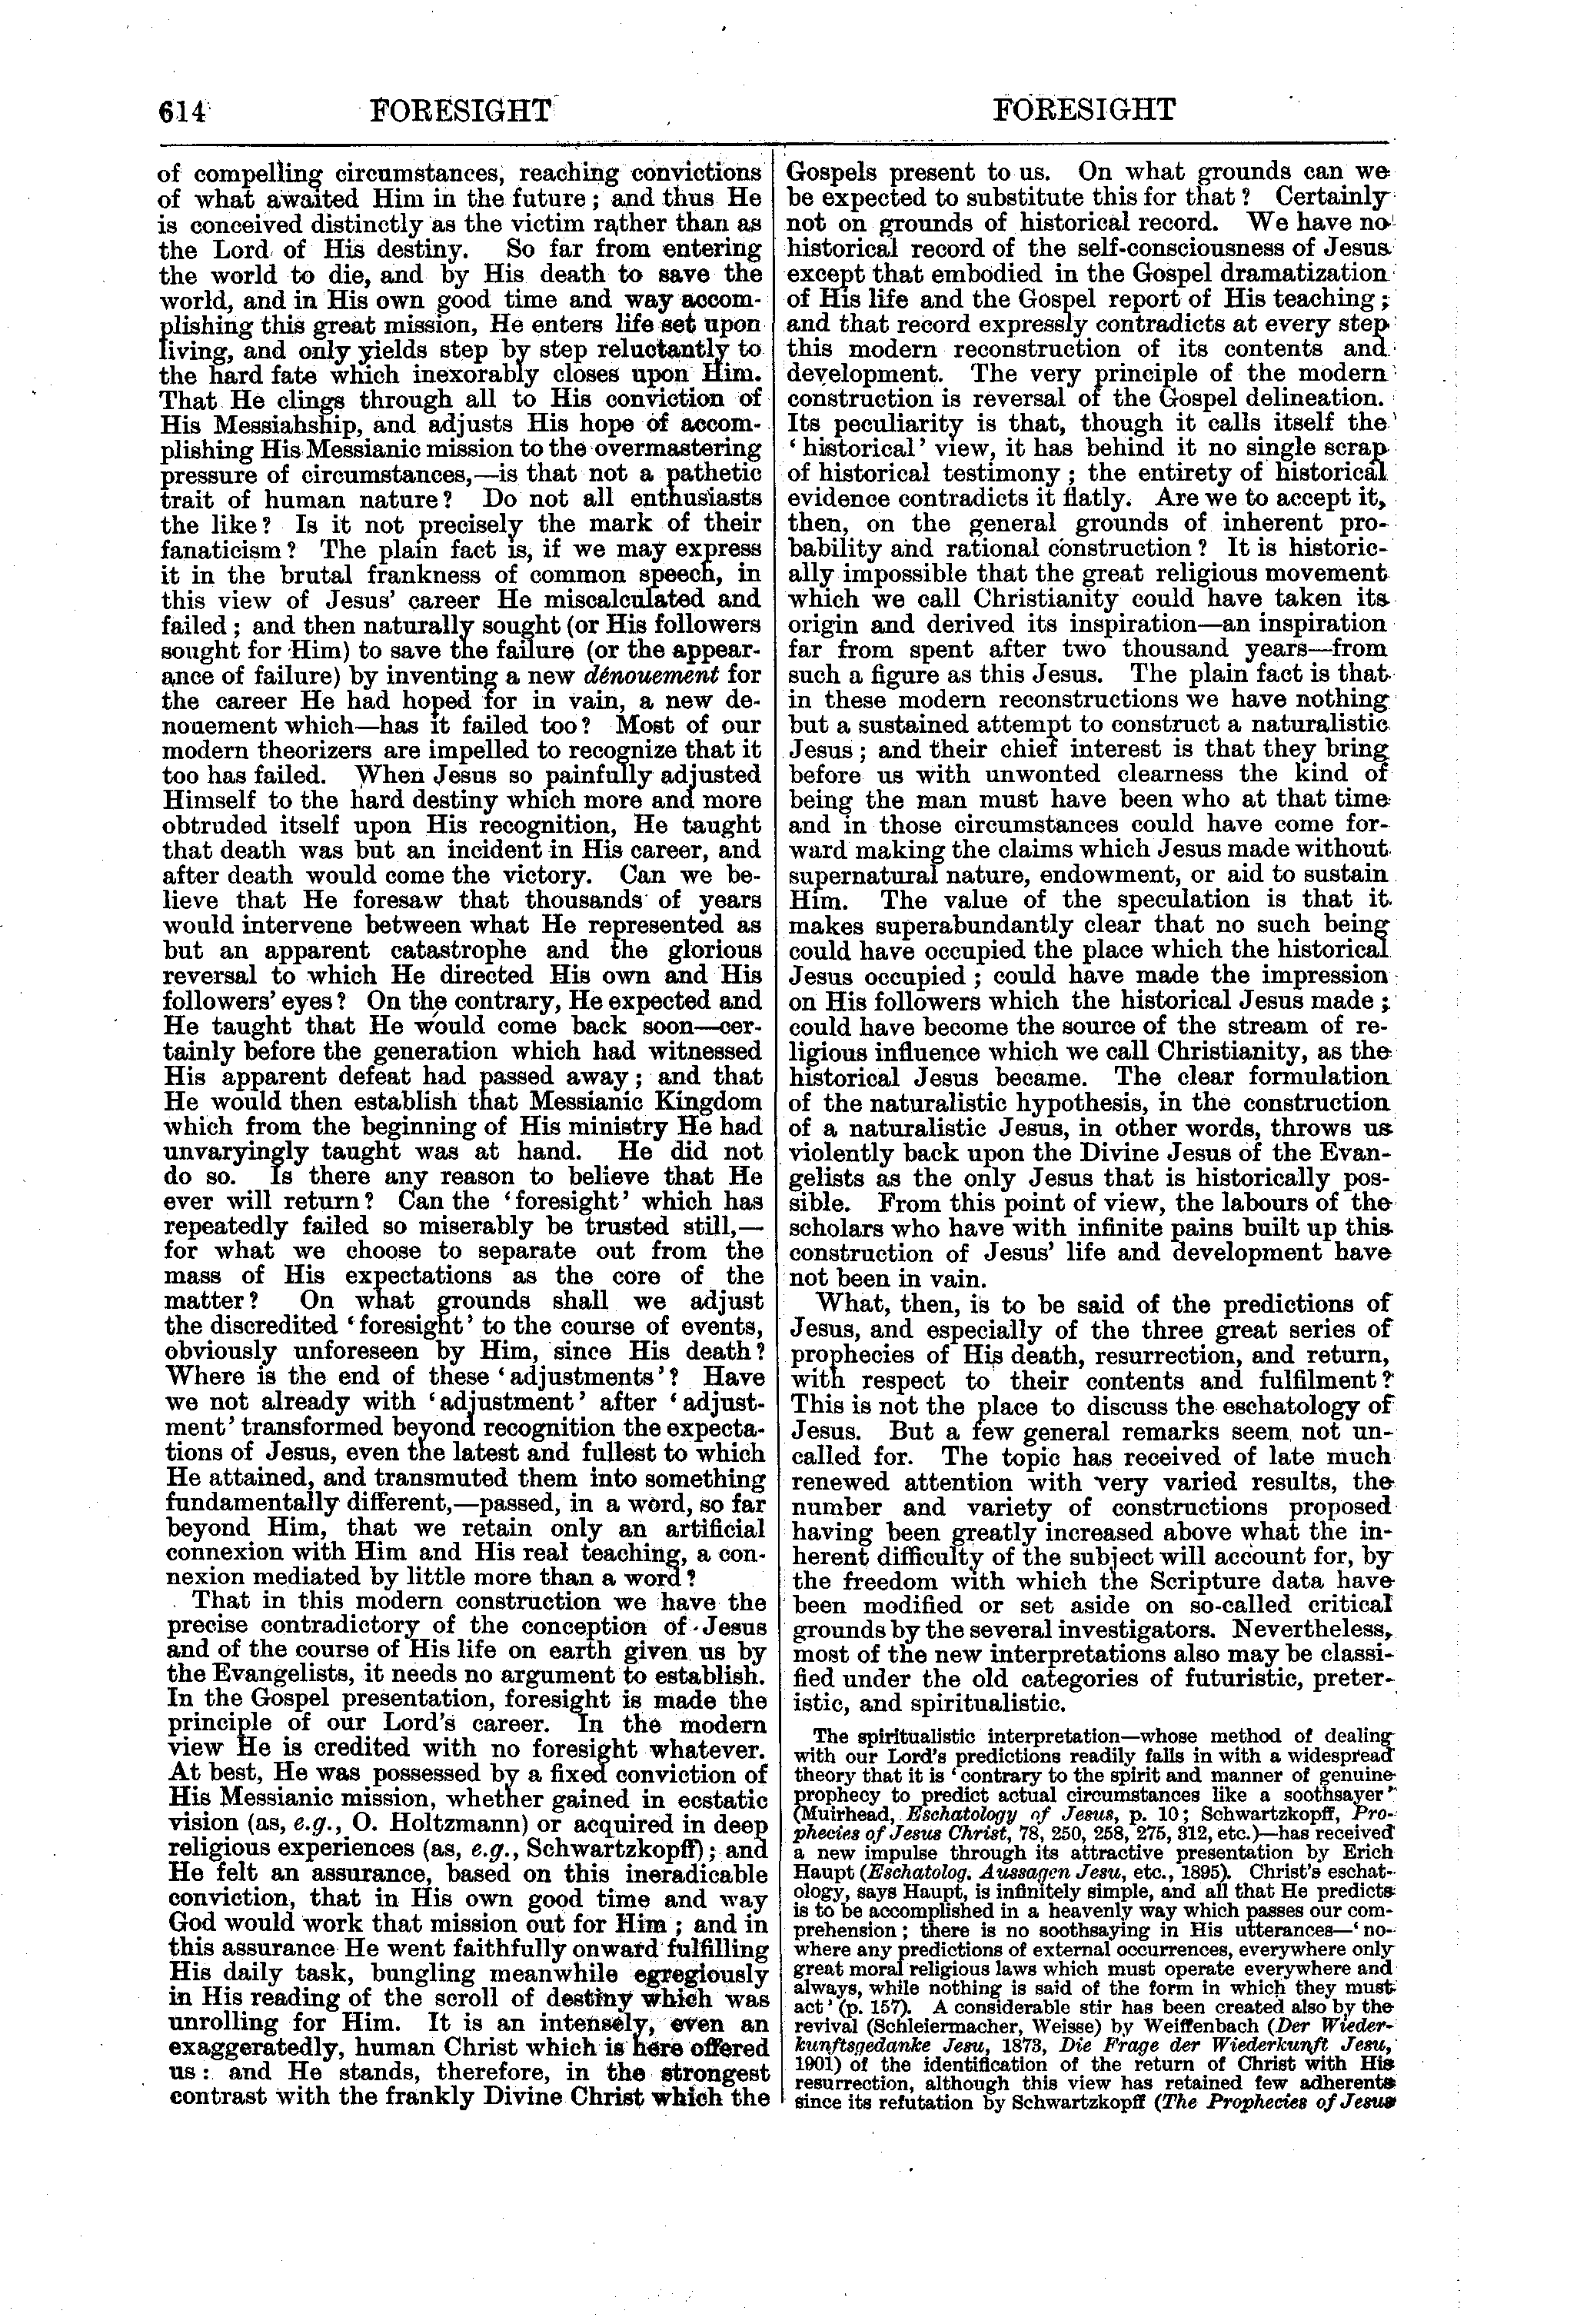 Image of page 614